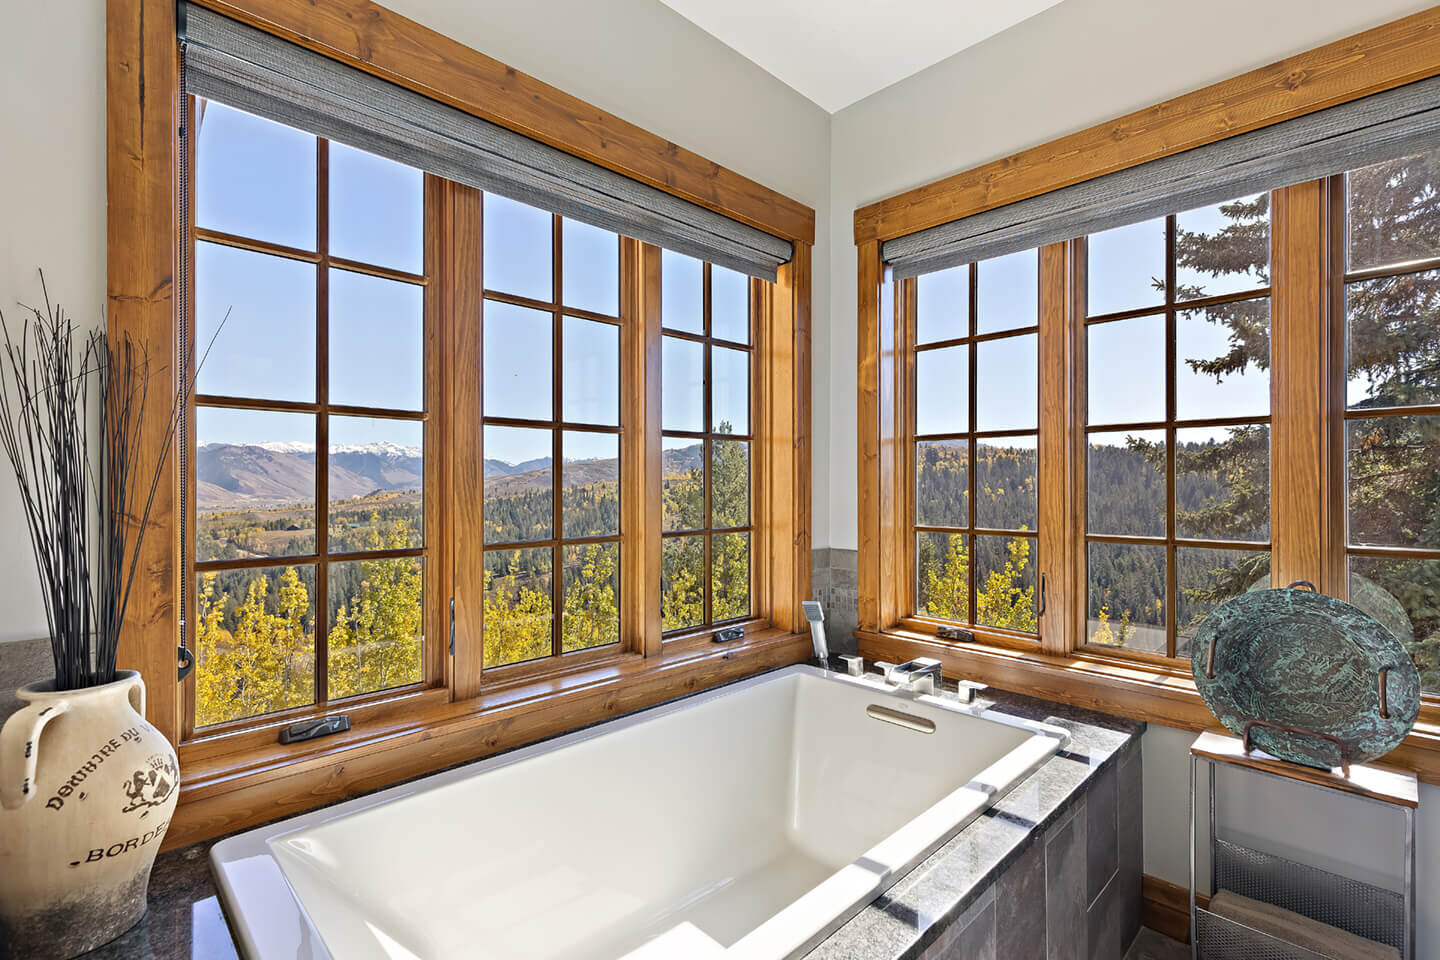 Bath tub with view downwards through French windows